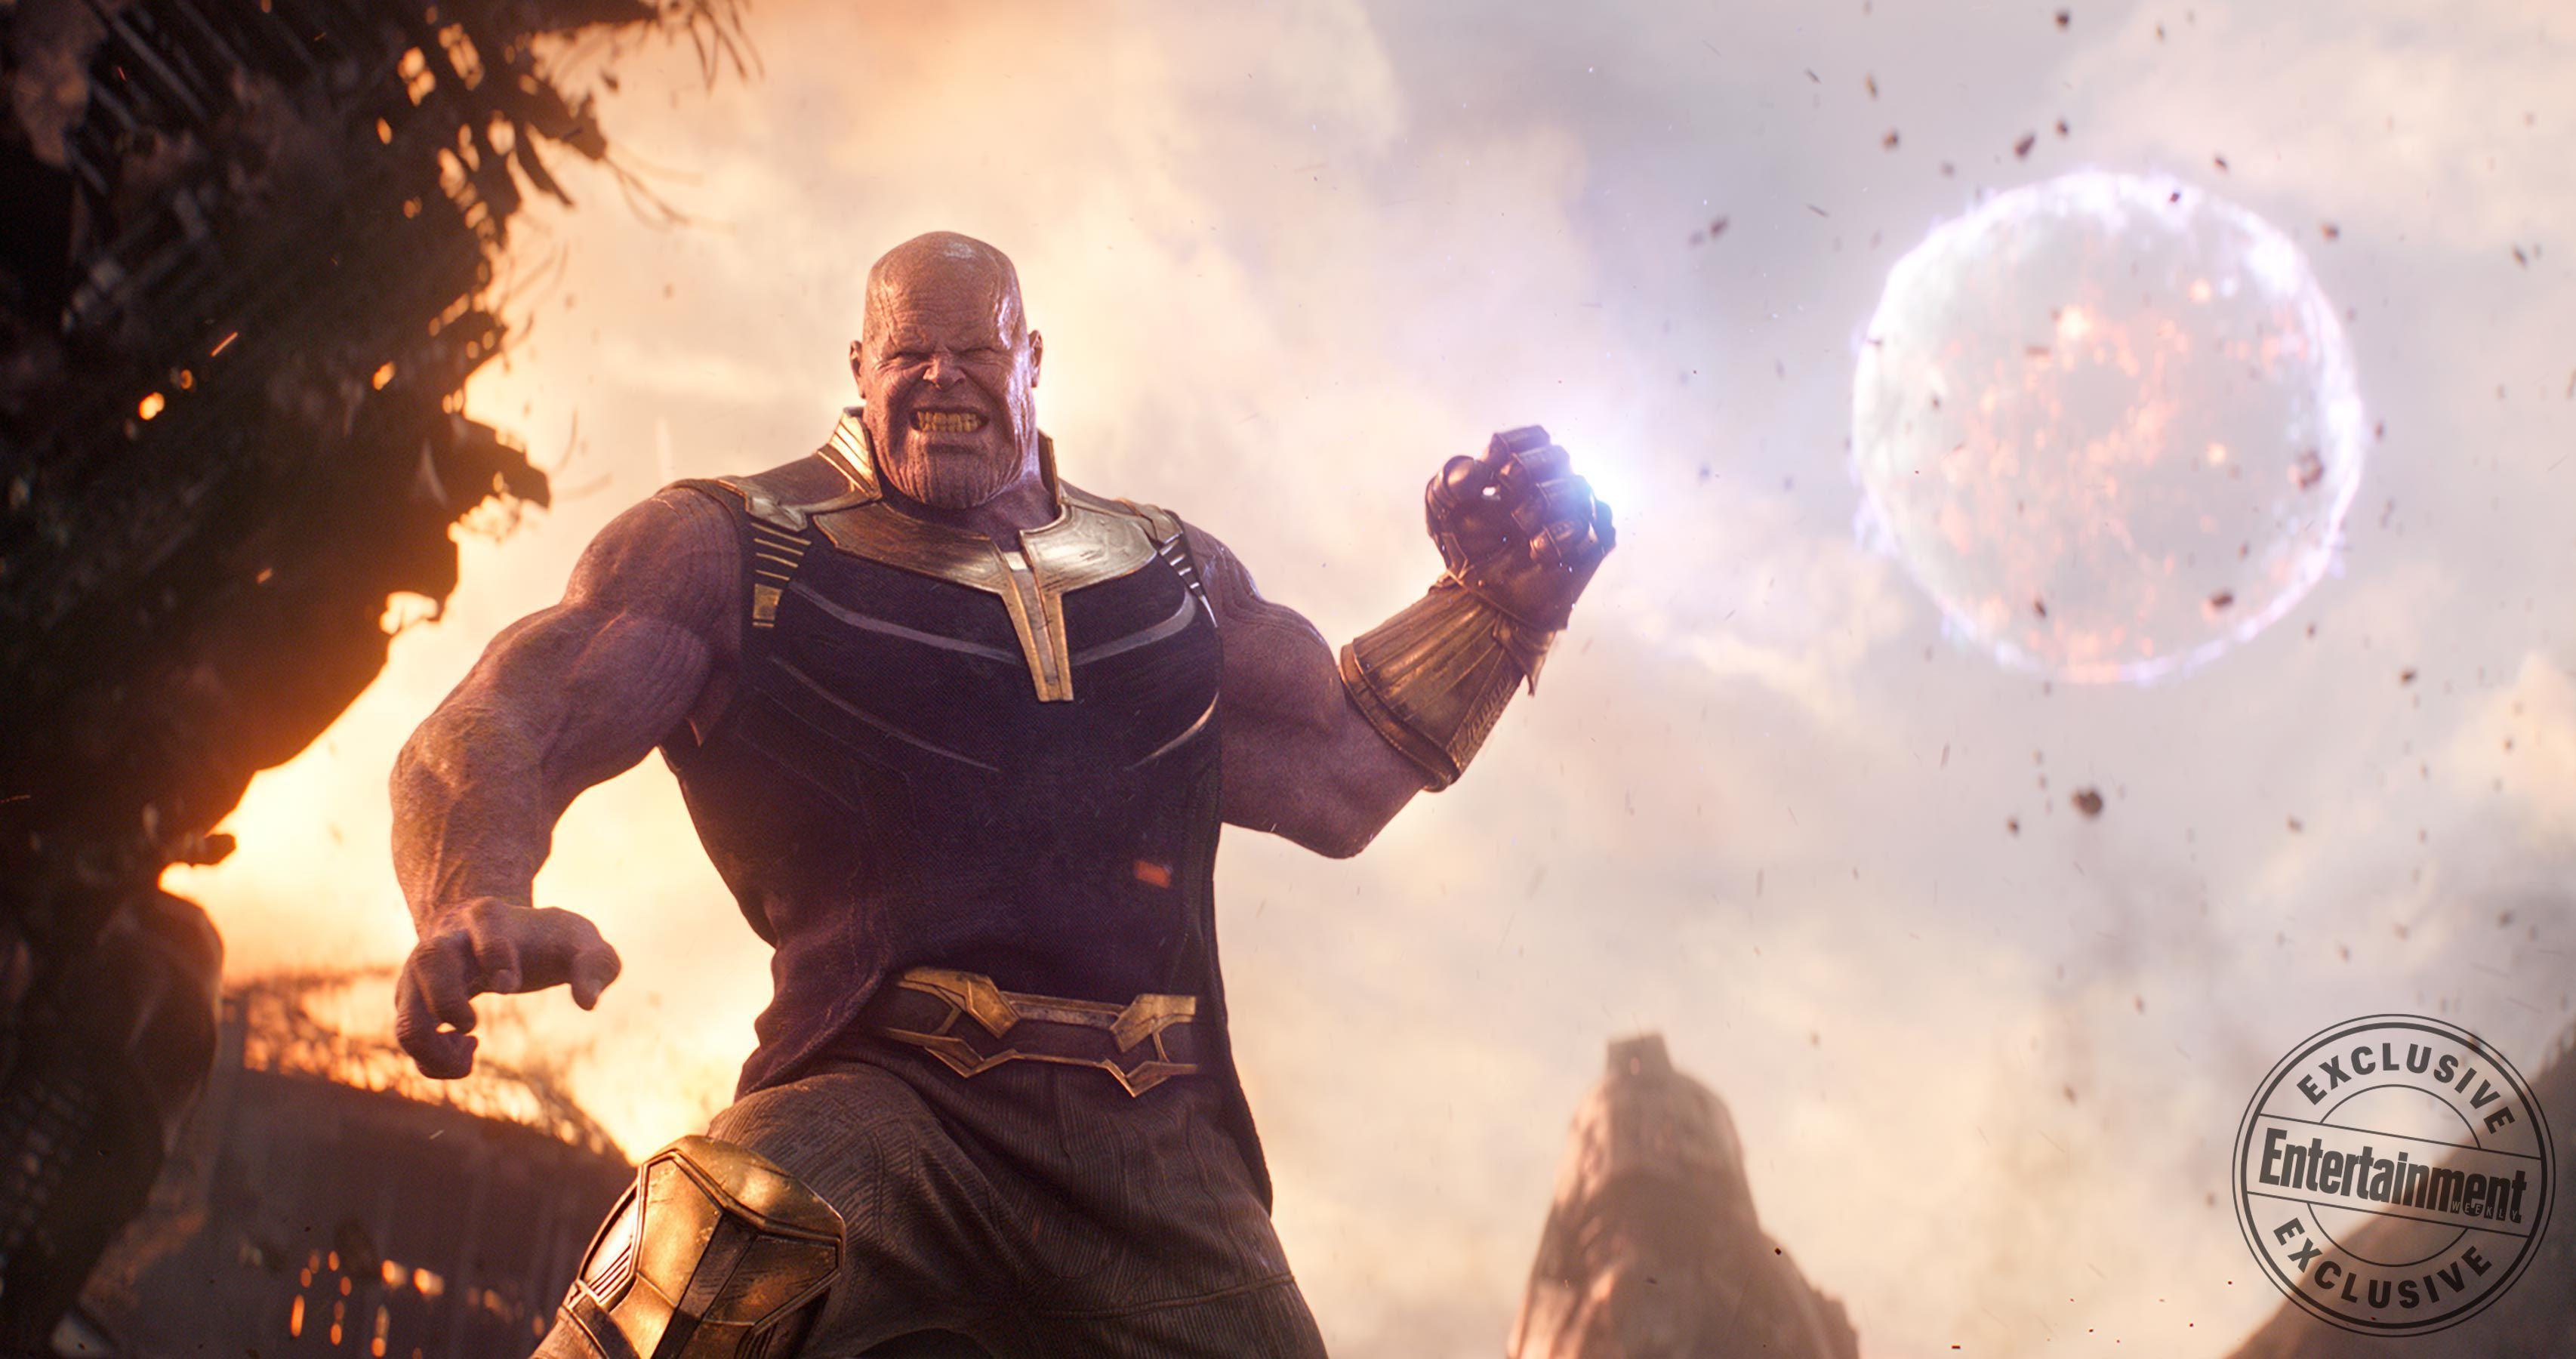 new image from 'Avengers: Infinity War' include Thanos throwing a